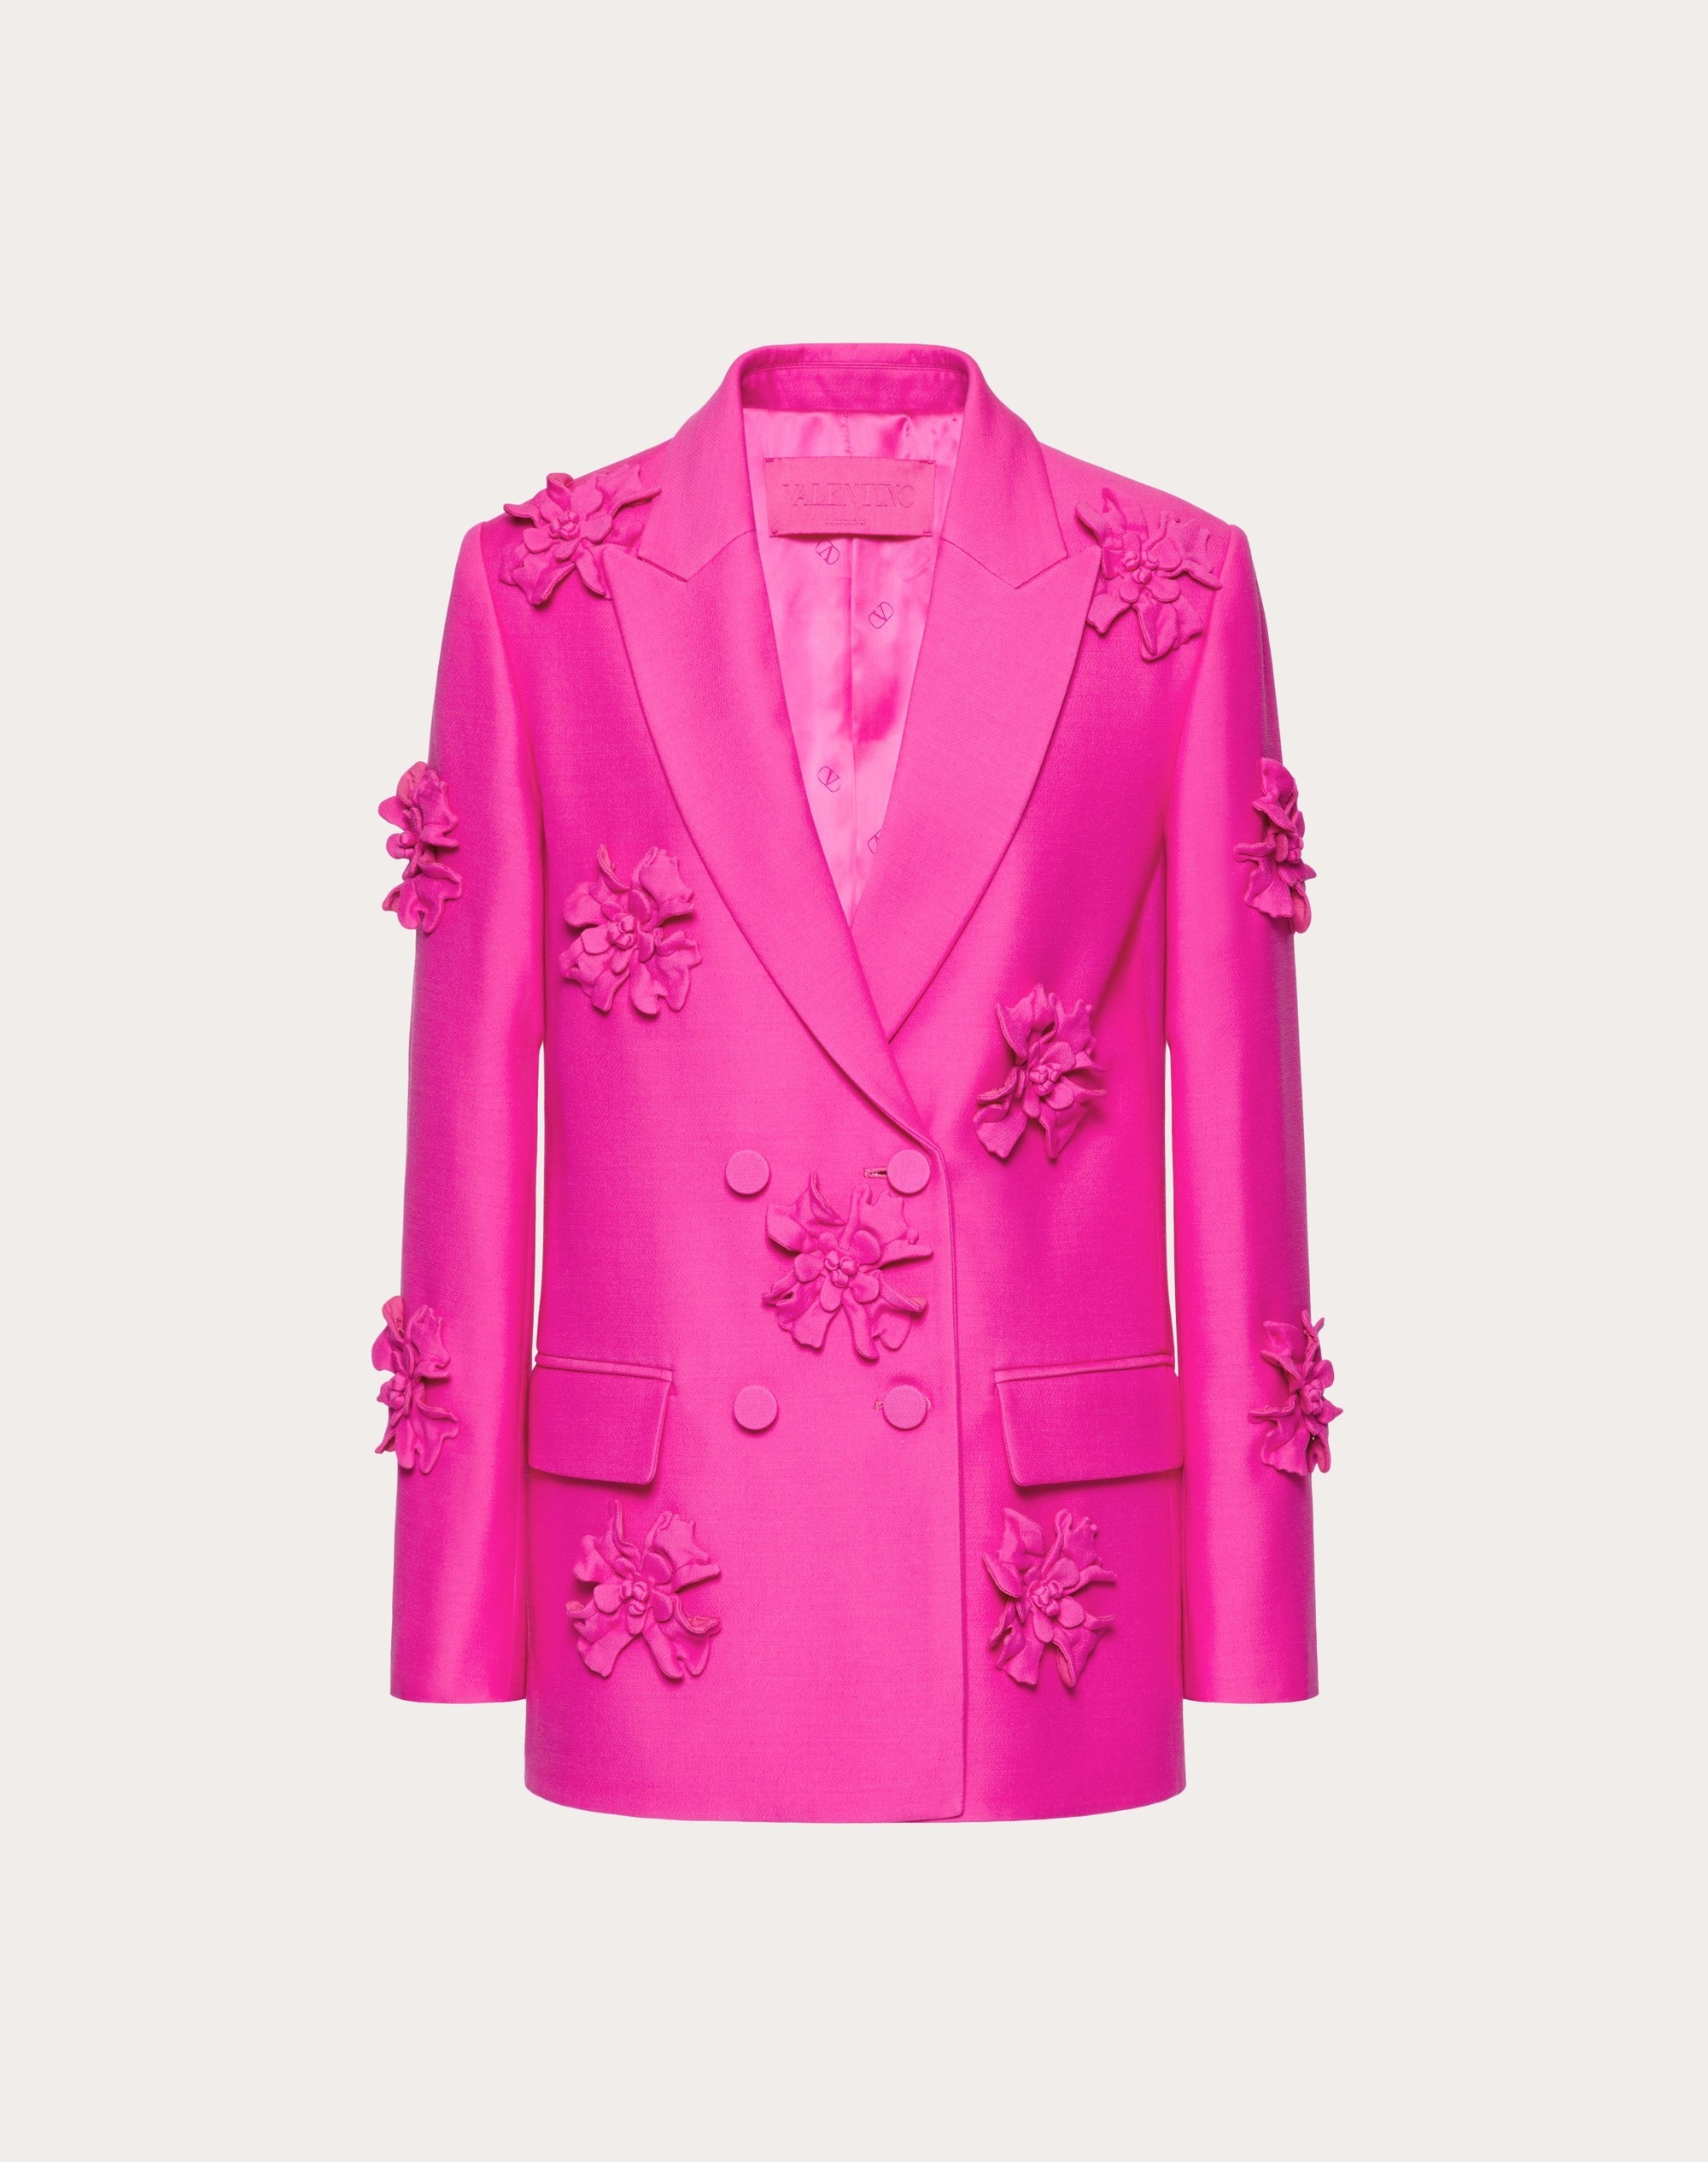 CREPE COUTURE BLAZER WITH FLORAL EMBROIDERY - 2